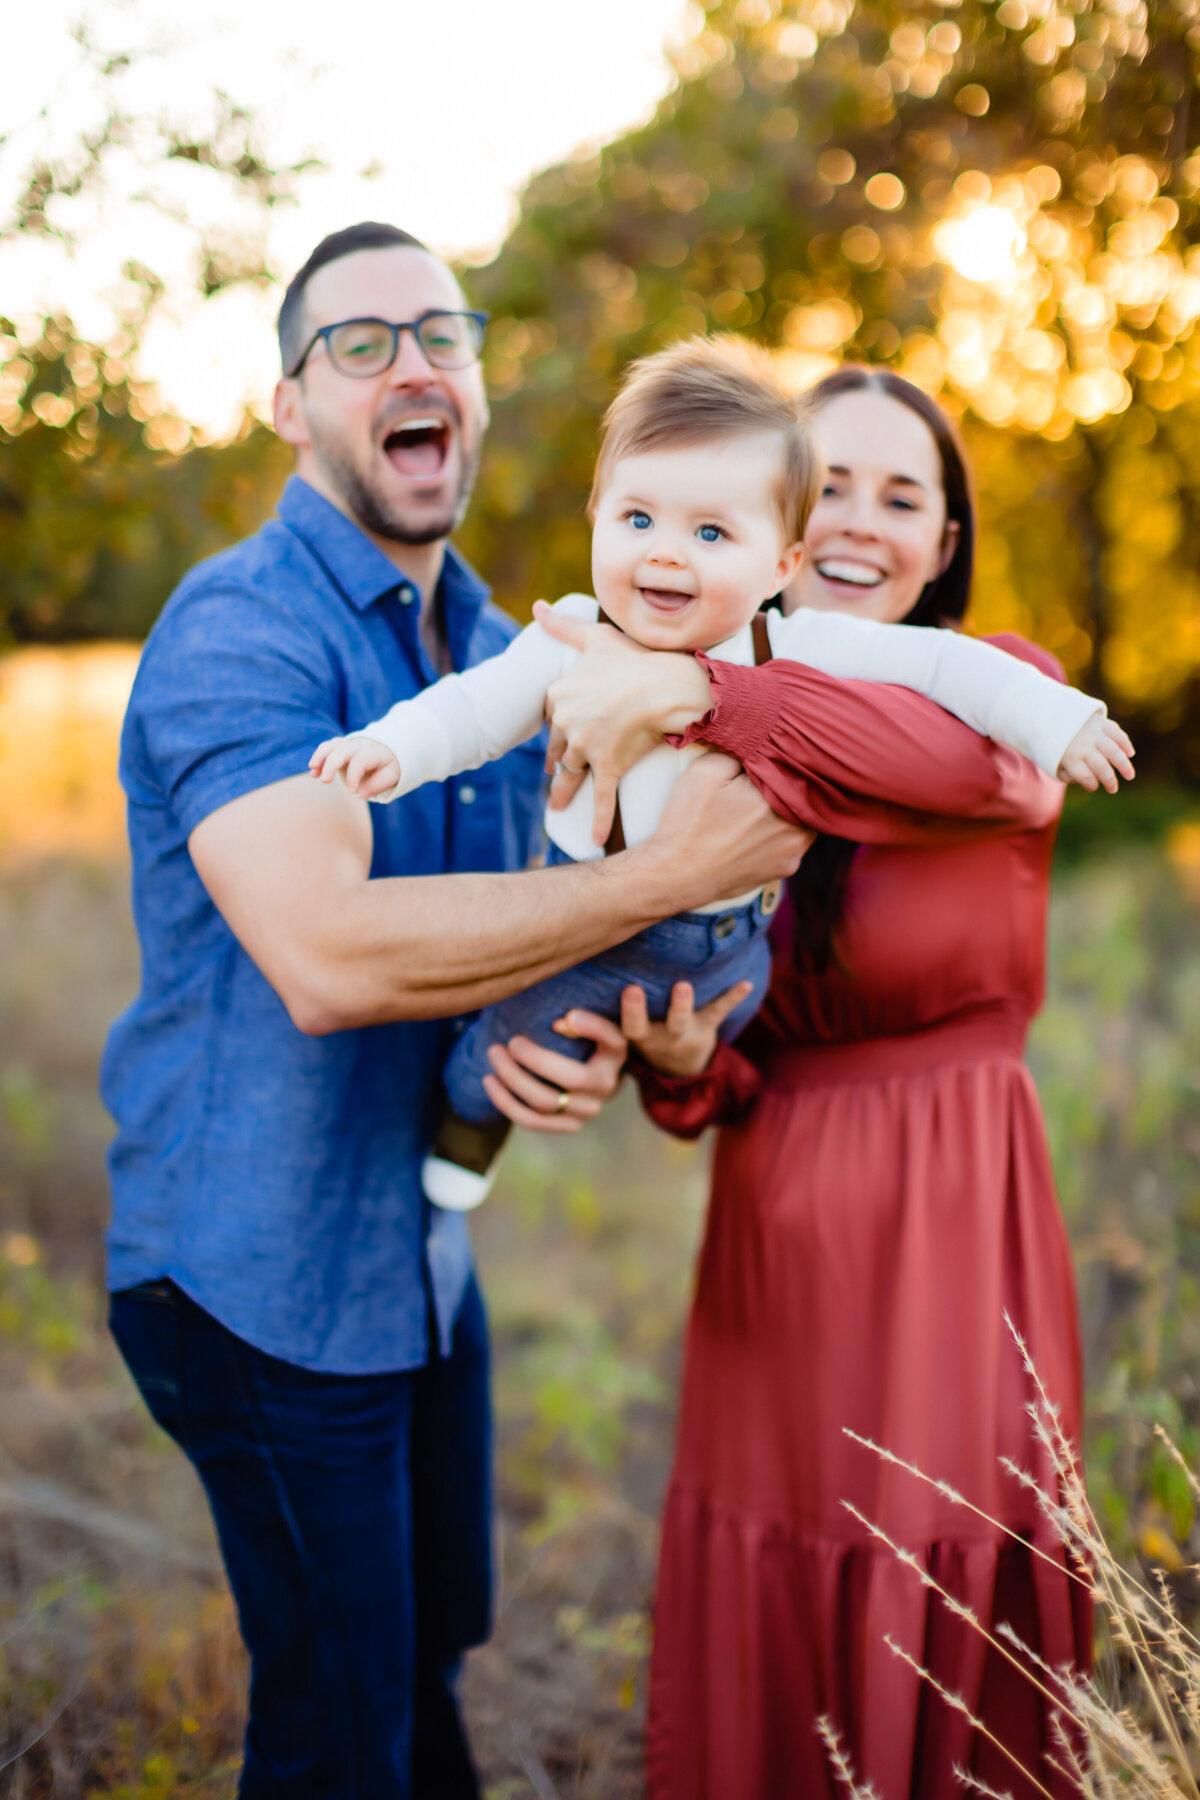 Experience the joy of being together with our family photography sessions